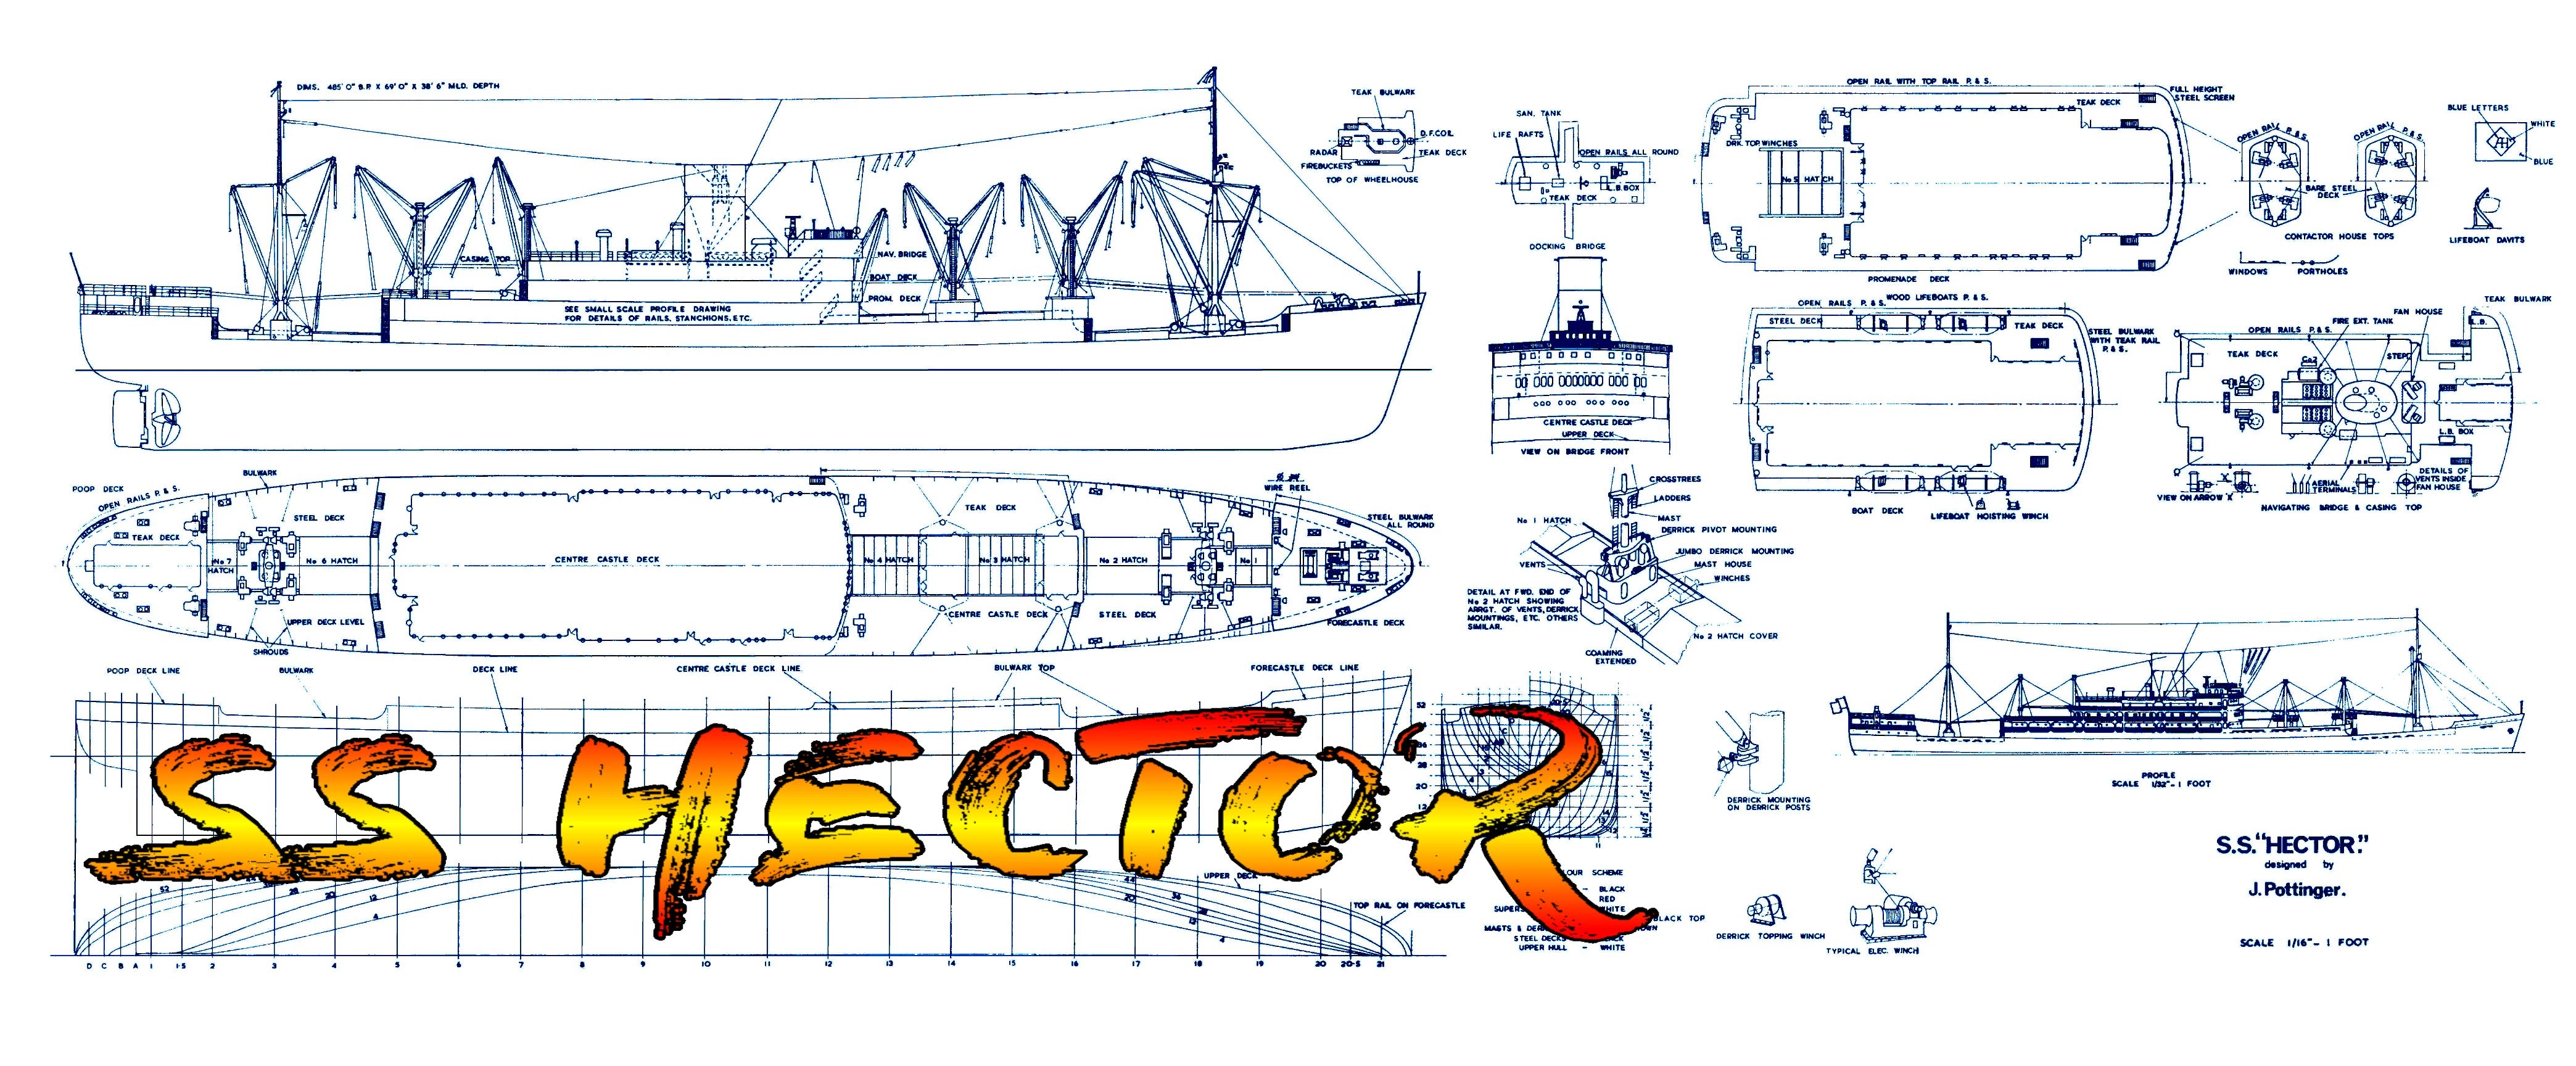 full size printed plan scale (1/16 in.-1 ft. blue funnel line “s.s. hector” suitable for radio control